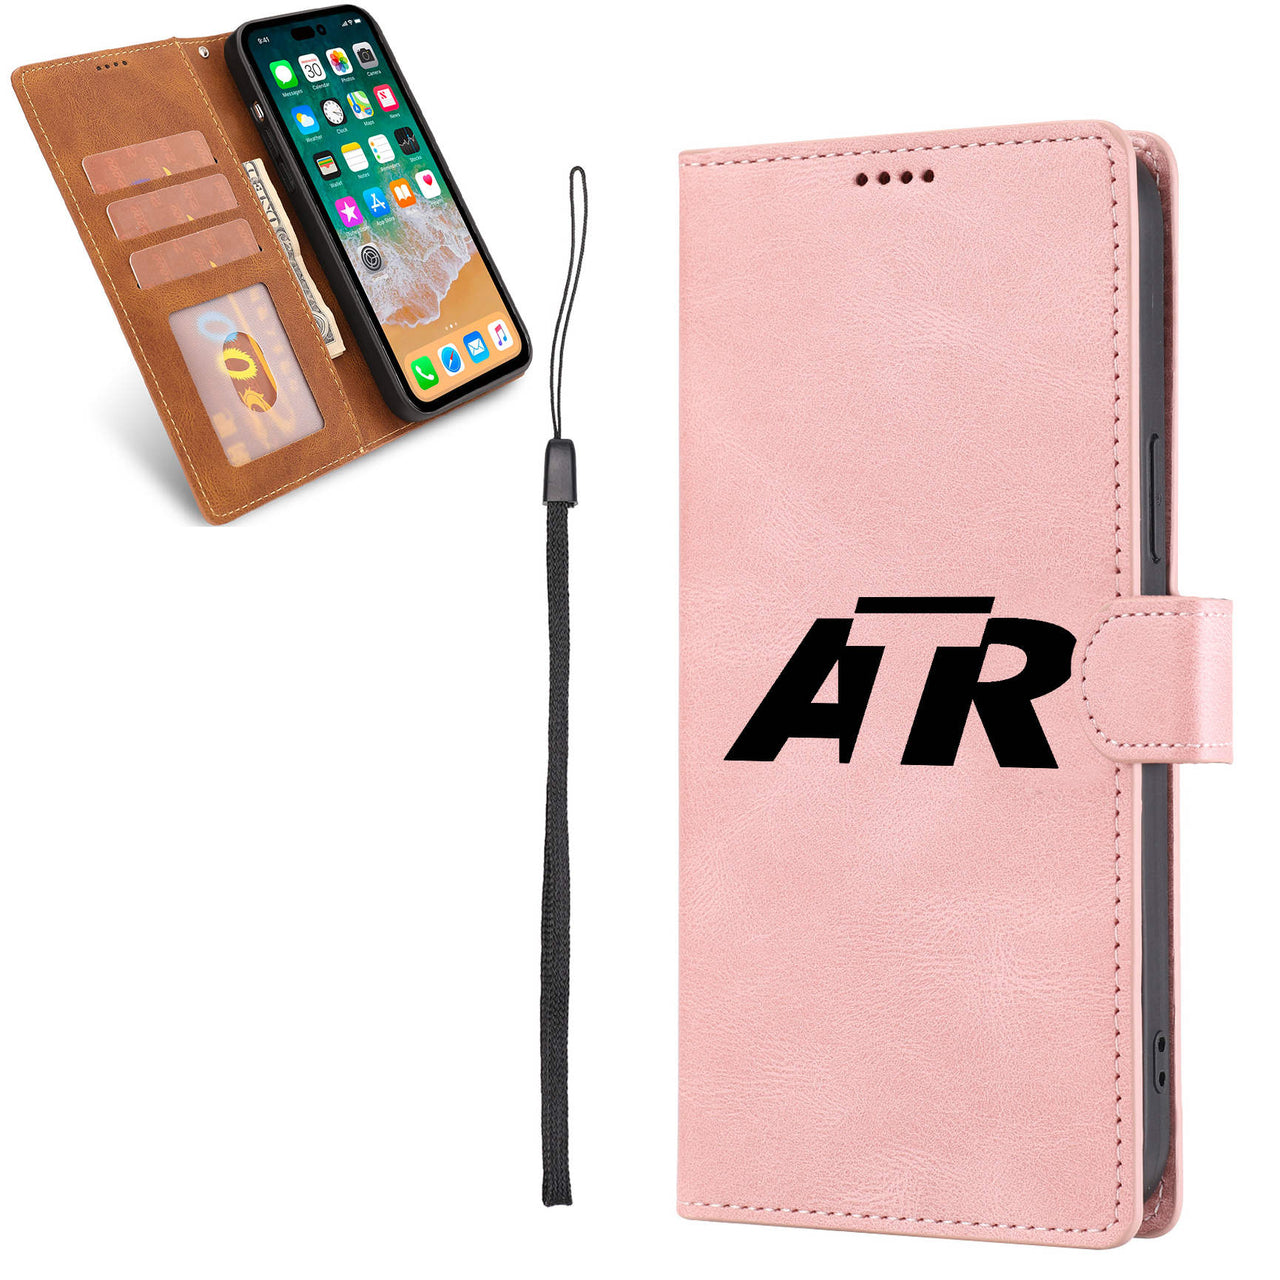 ATR & Text Designed Leather iPhone Cases